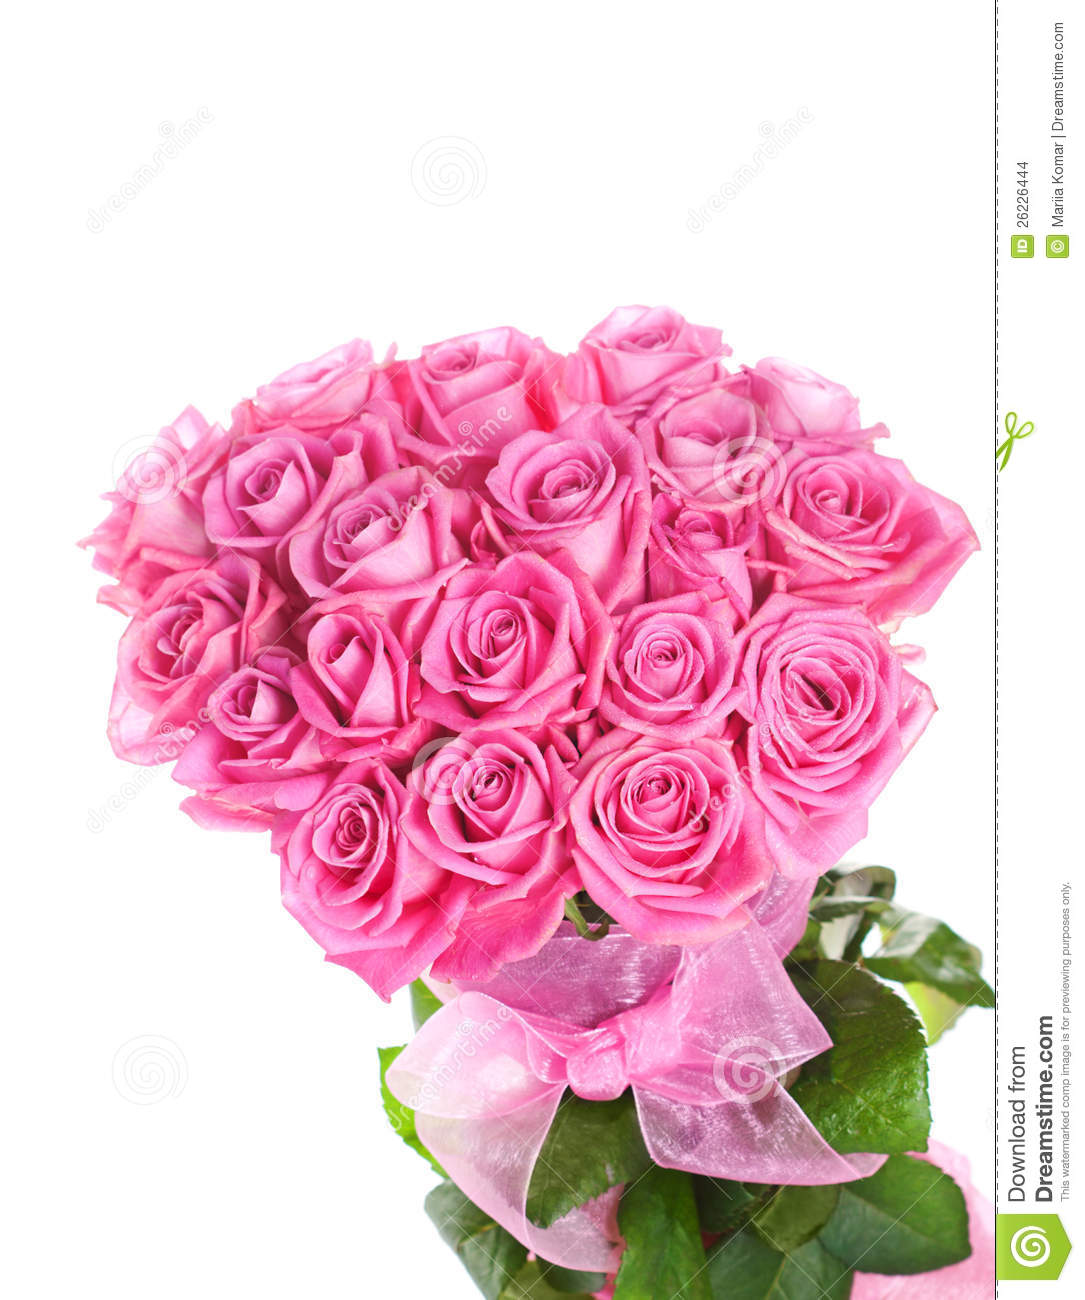 More Similar Stock Images Of   Bouquet Of Pink Roses  